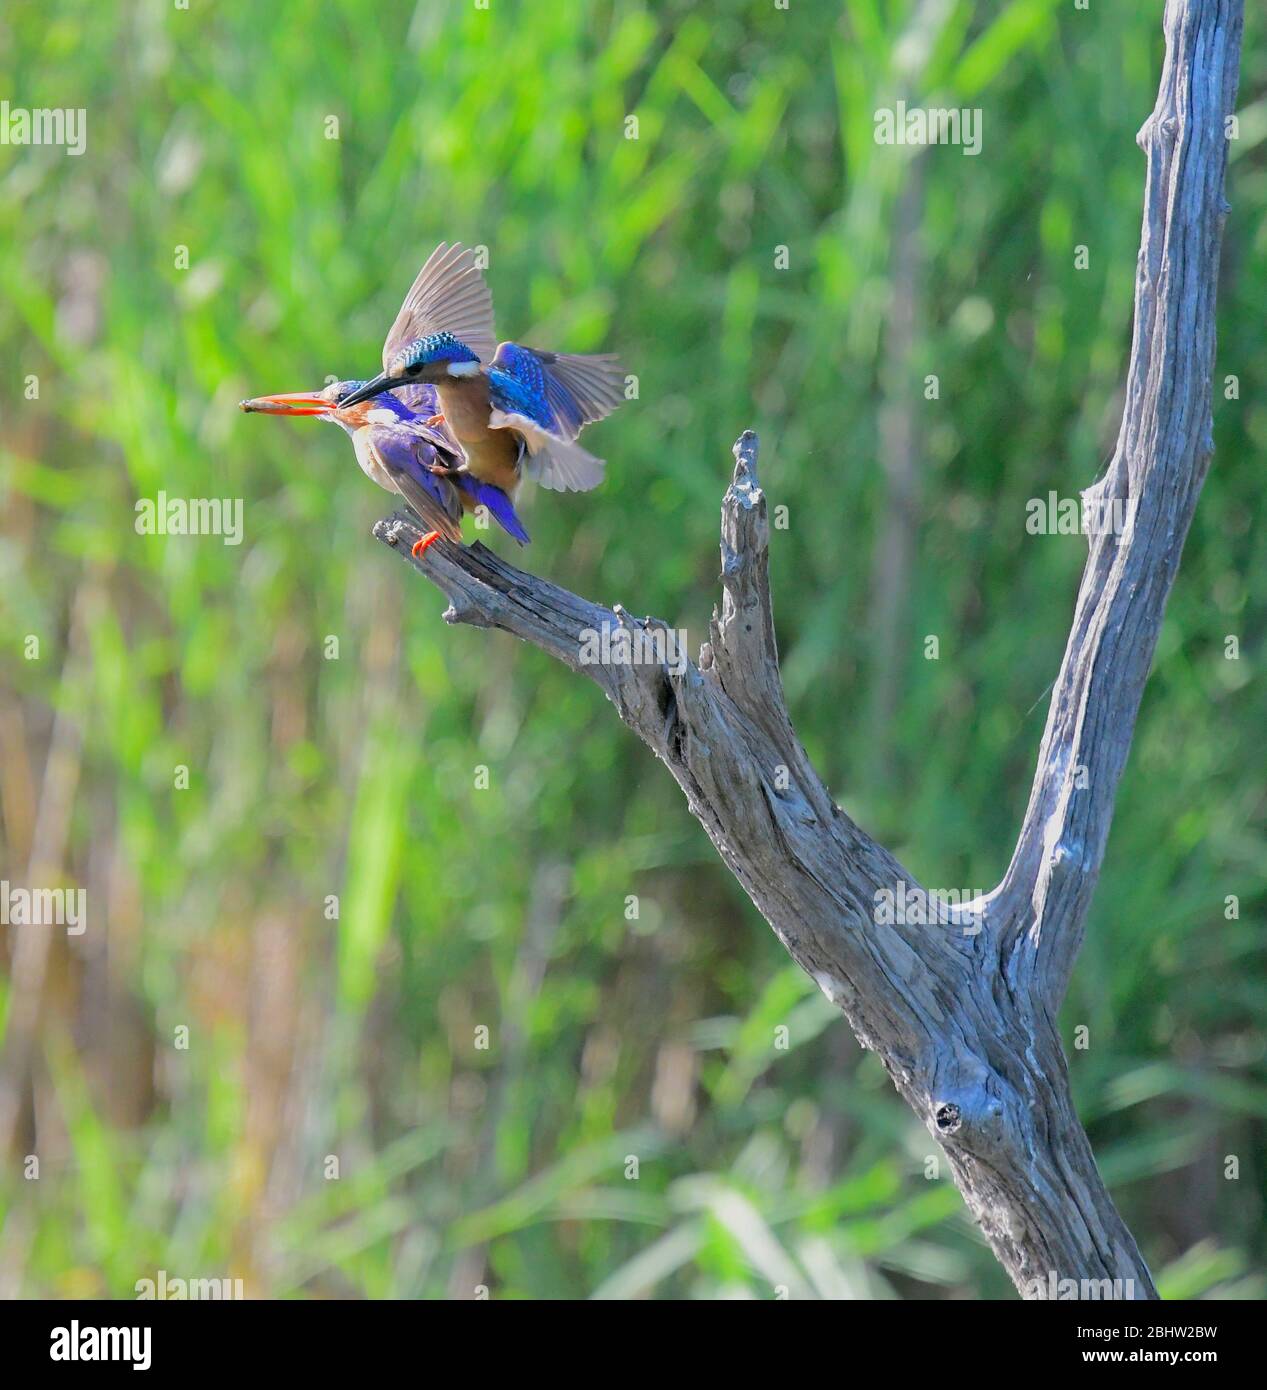 Baby malachite kingfisher landing on mom's back while begging for food Stock Photo